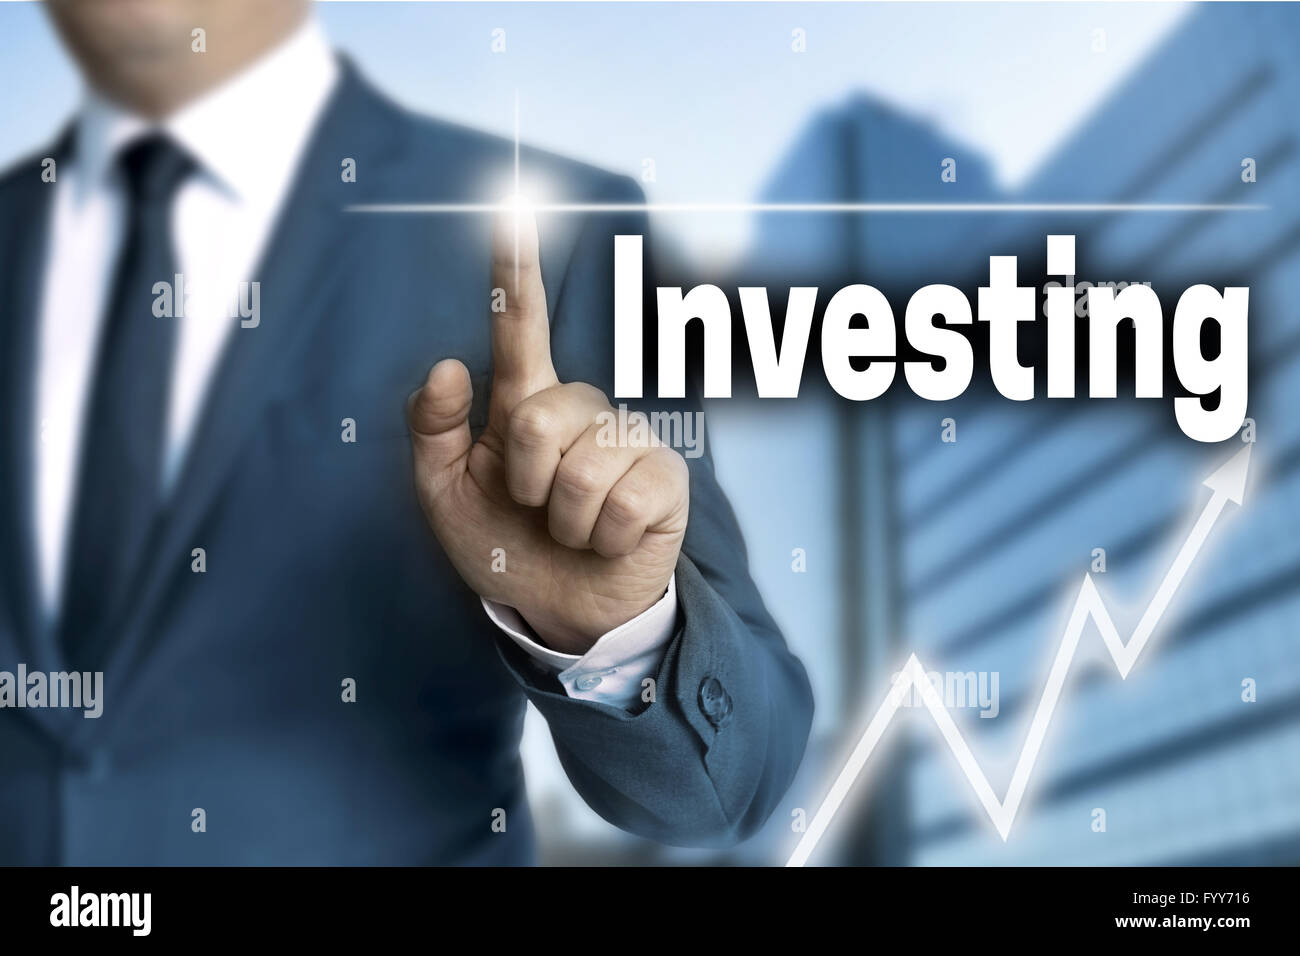 investing touchscreen is operated by businessman. Stock Photo